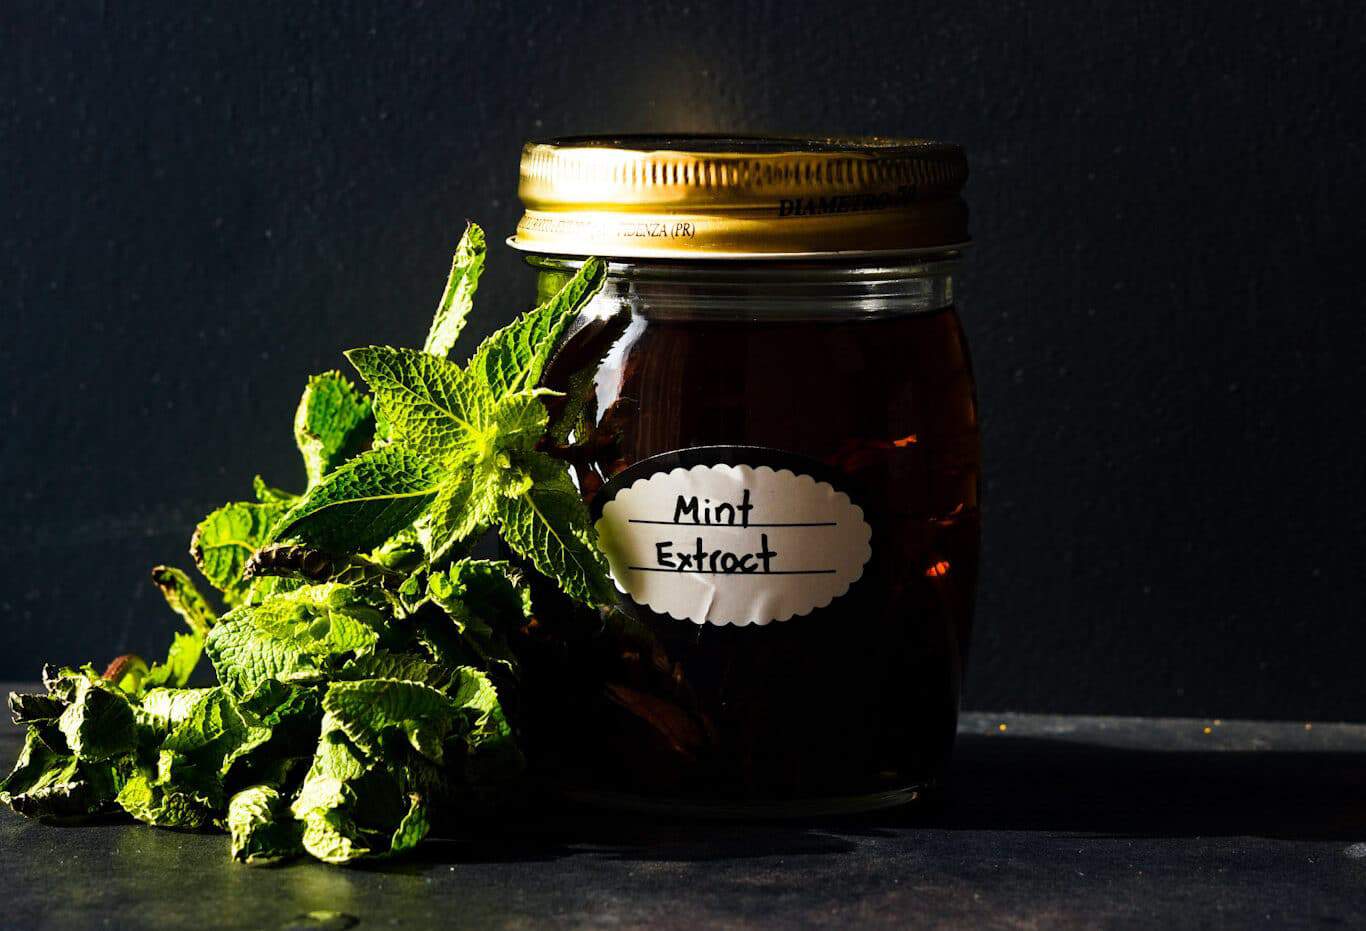 Mason jar labeled "Mint Extract" next to sprig of mint